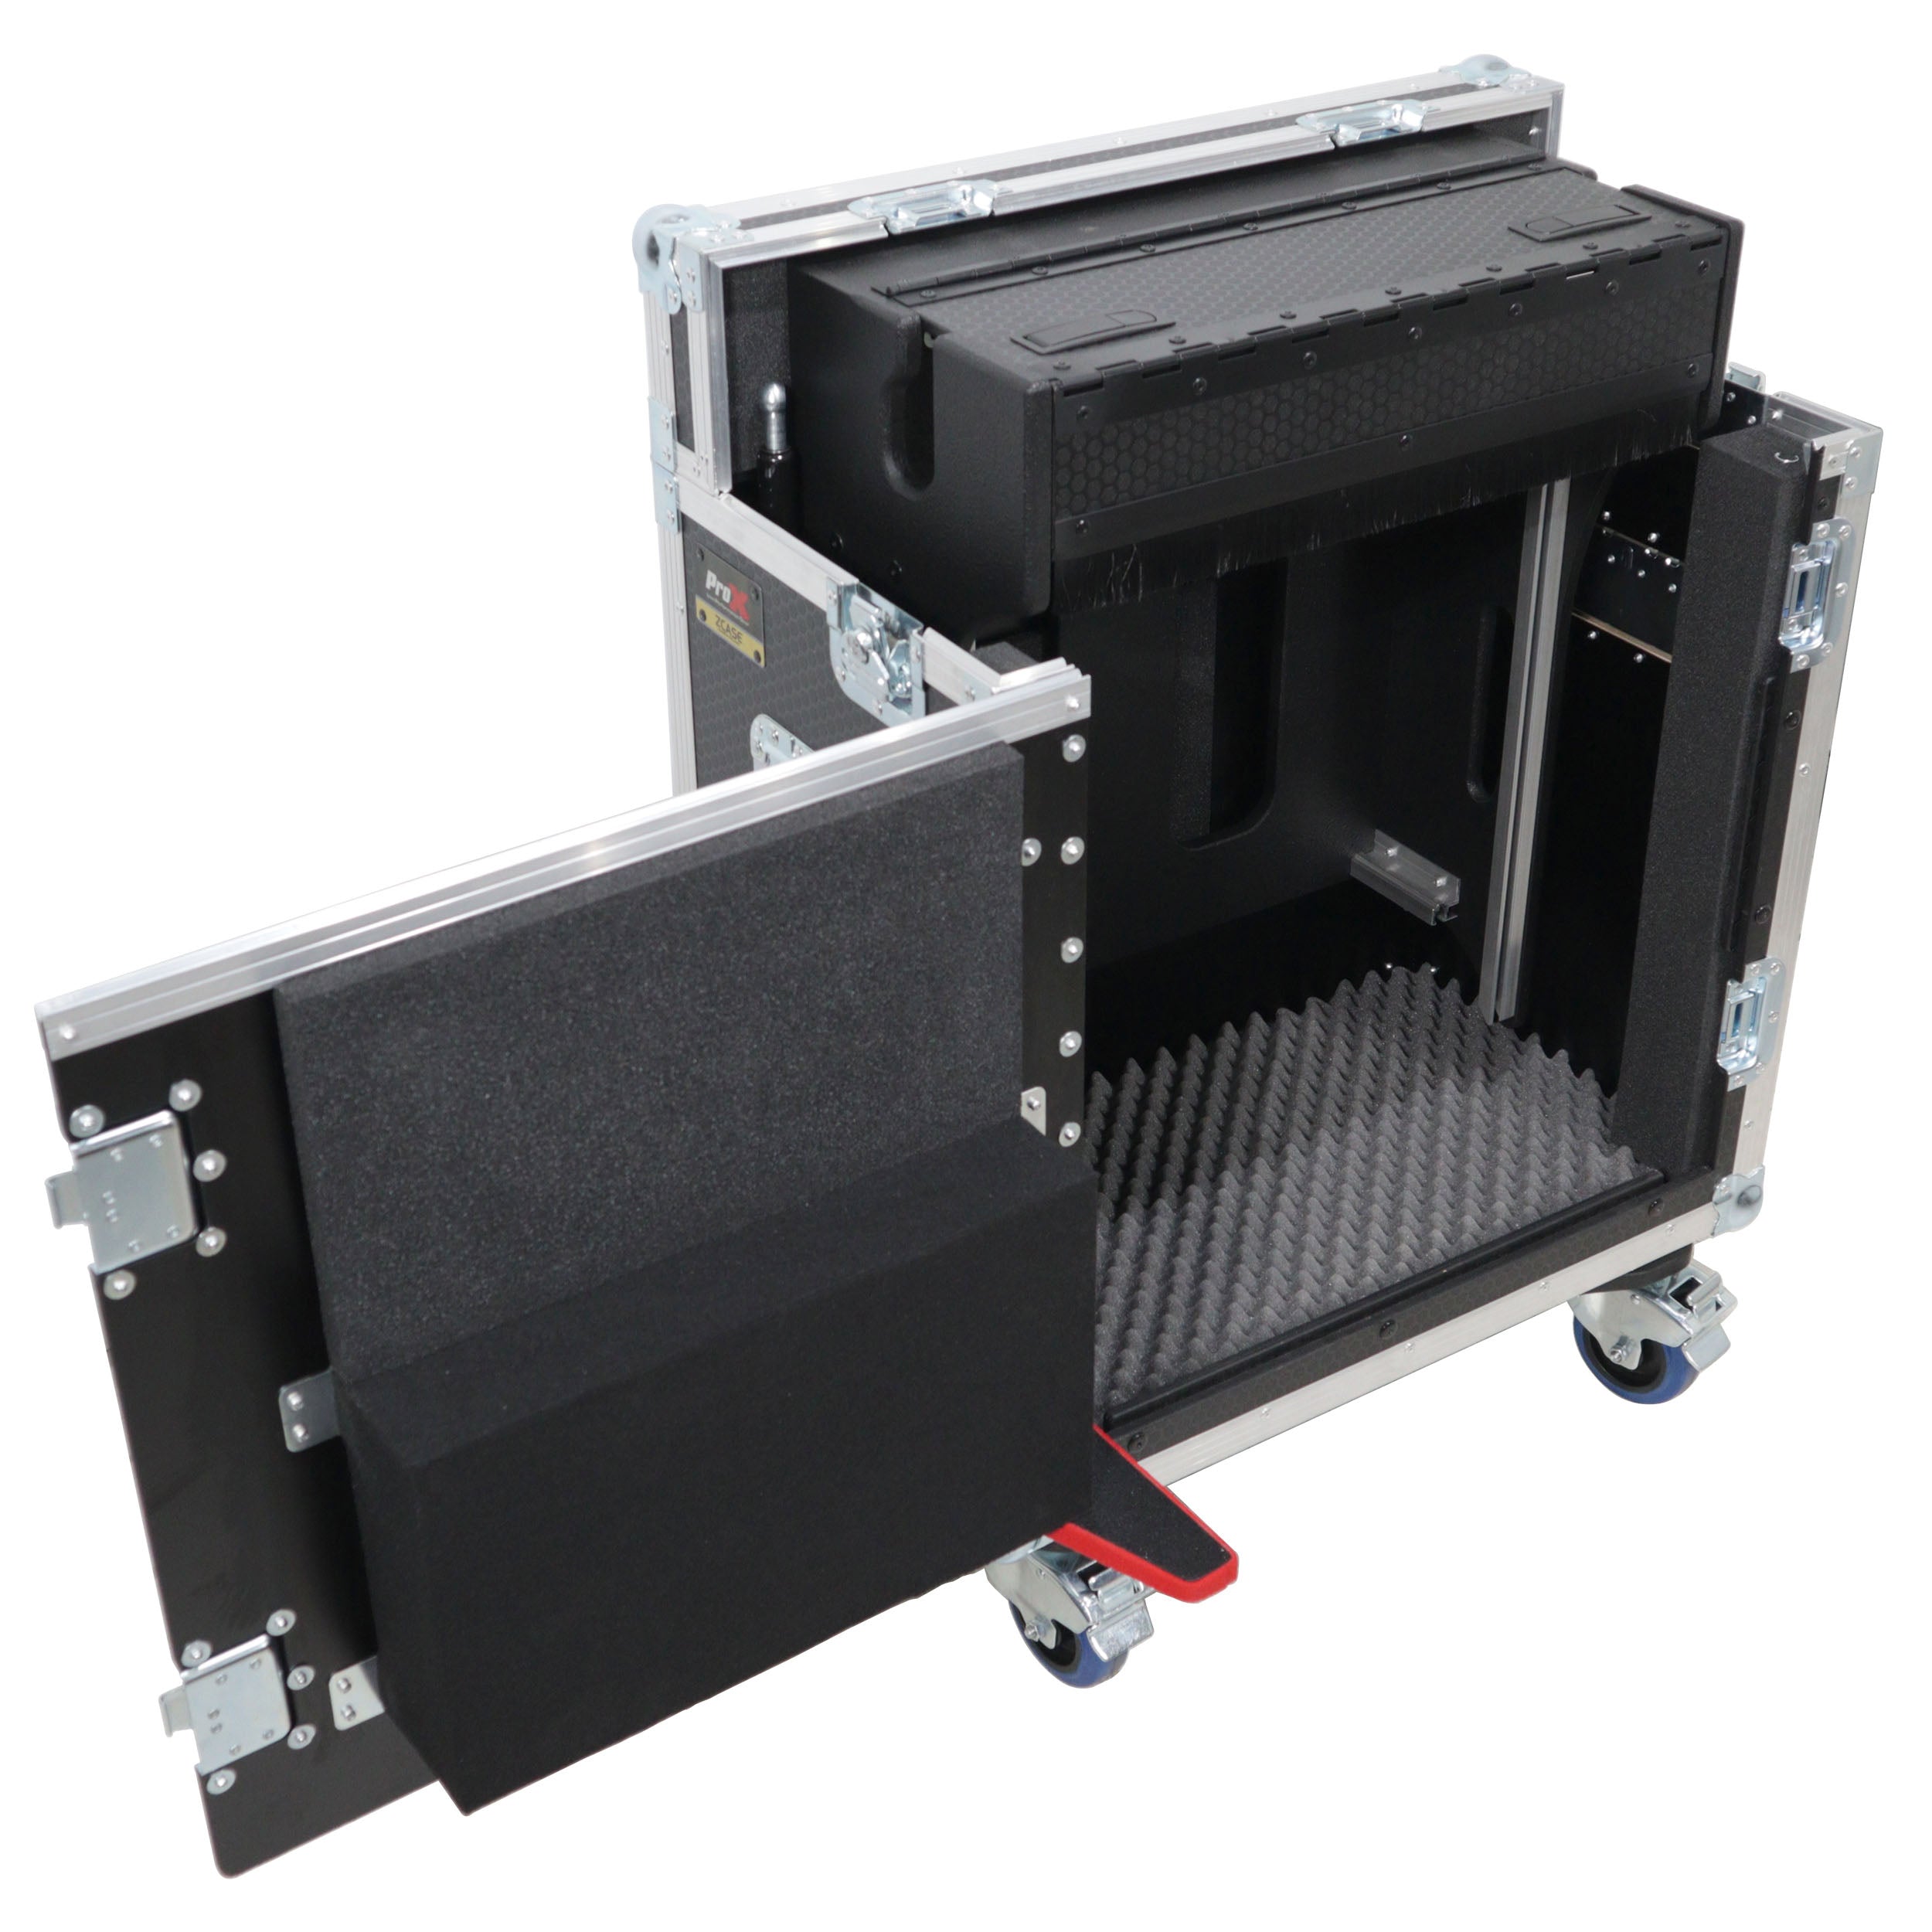 Pro X For Allen and Heath SQ 5 Flip-Ready Hydraulic Console Easy Retracting Lifting Case by ZCASE XZF-AHSQ5